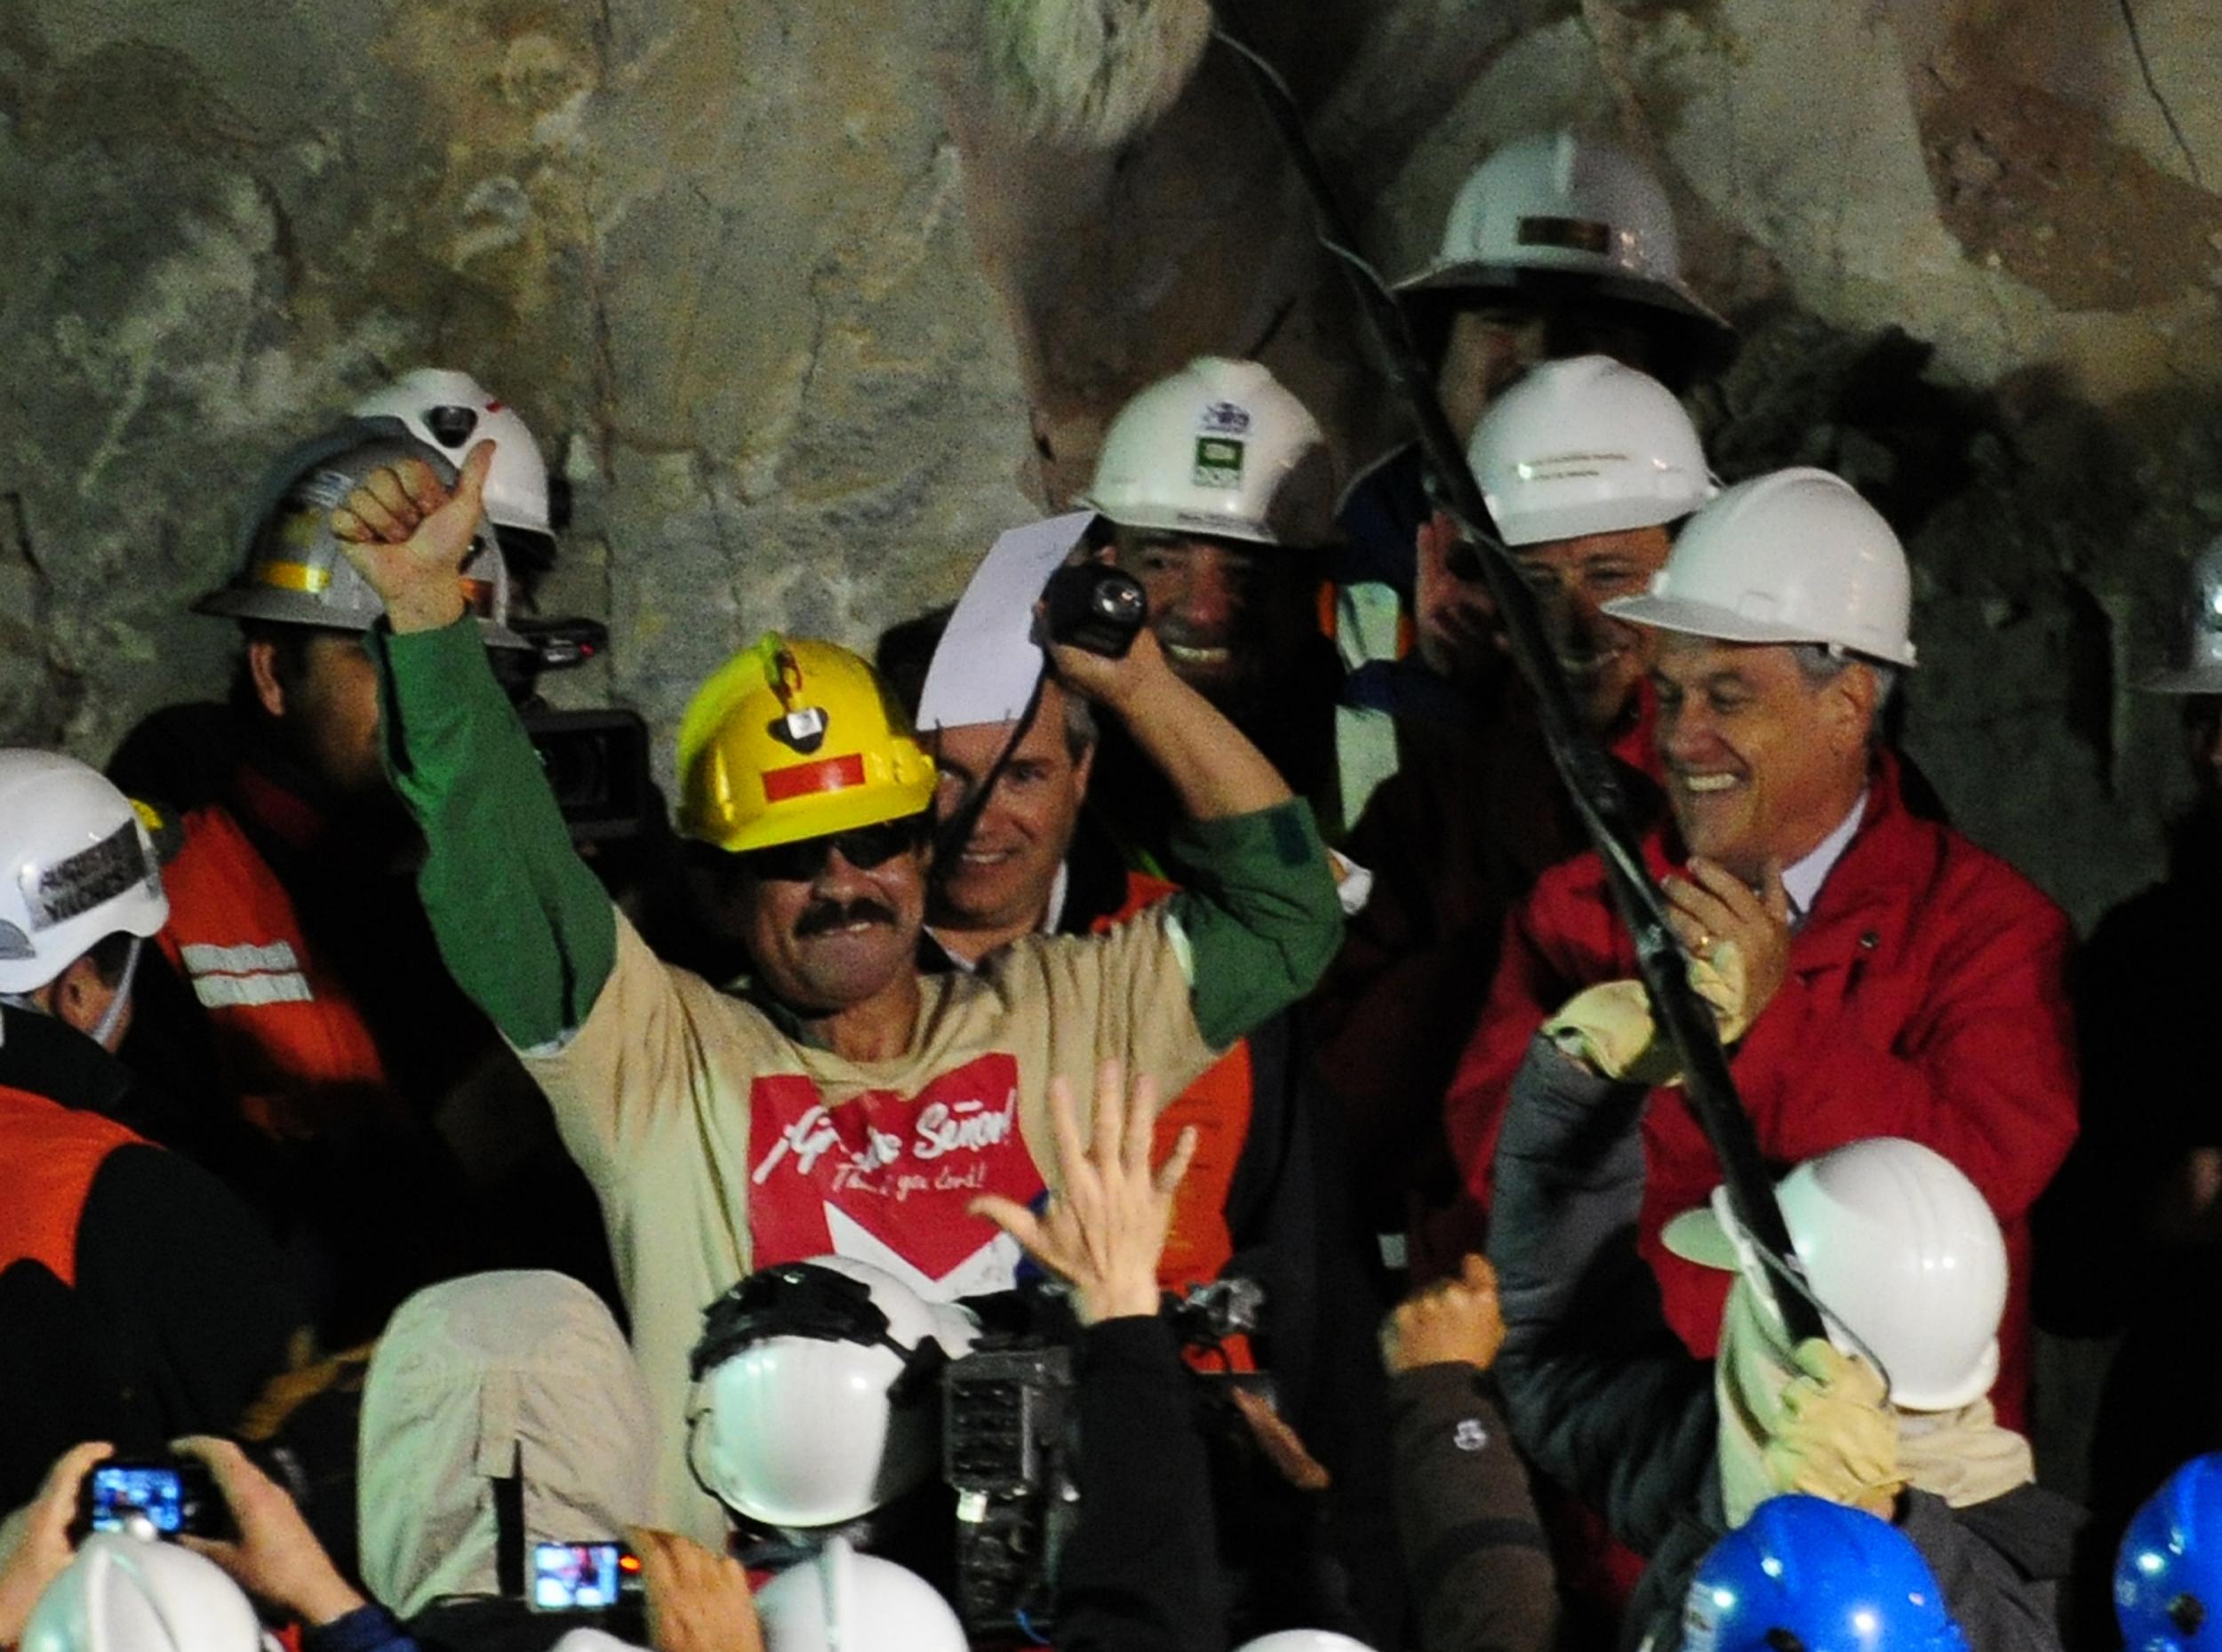 Thirty-three miners were trapped for 10 weeks in an ordeal that captivated the world